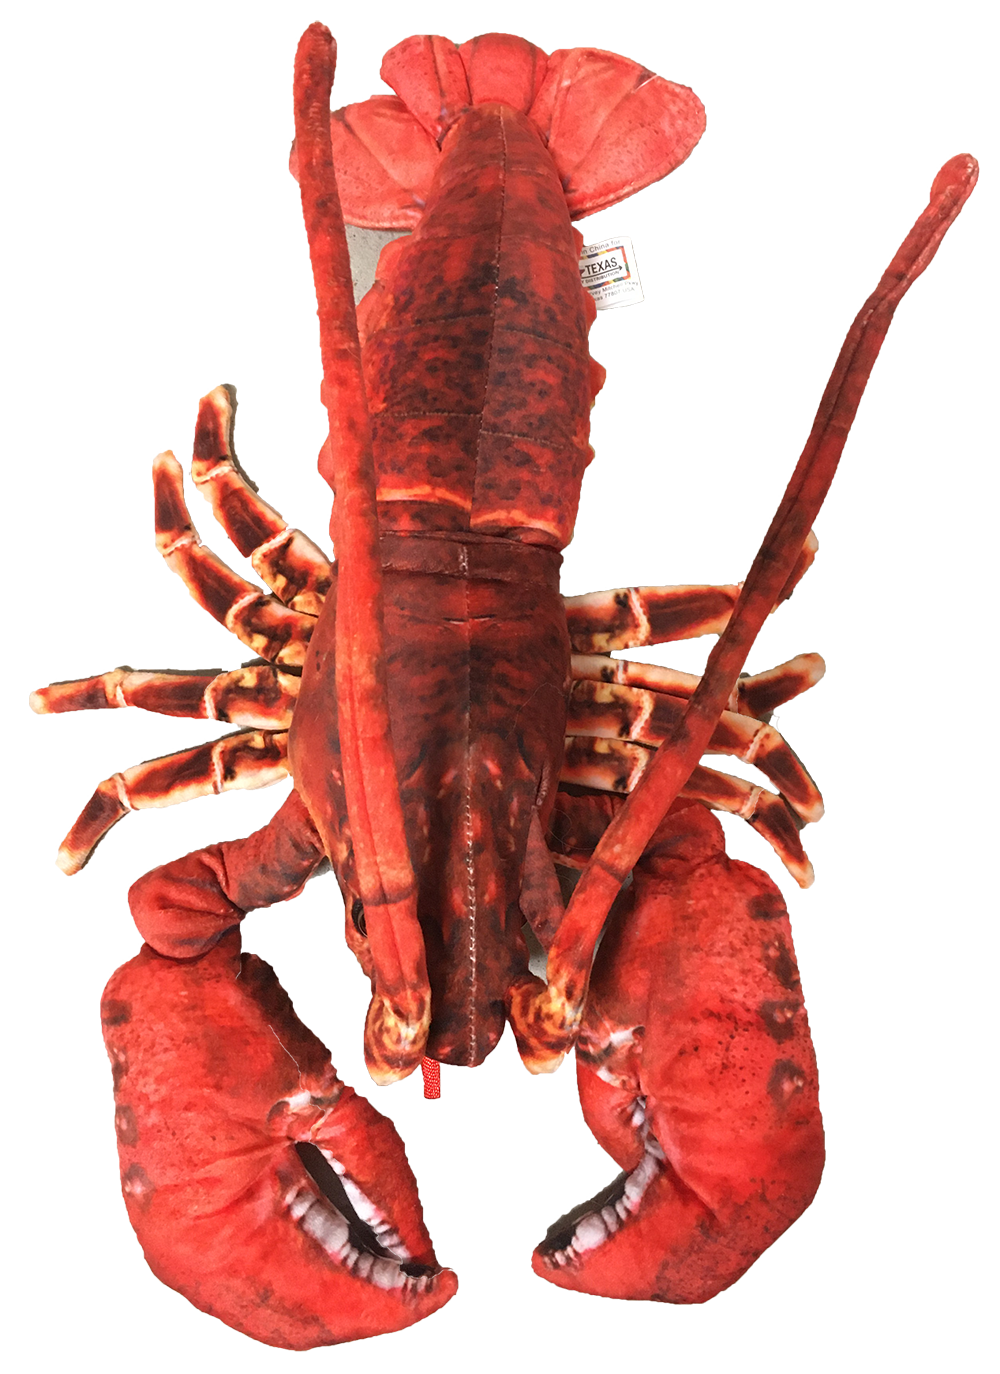 Lobster with Claws 18" Ocean Plush Stuffed Animal